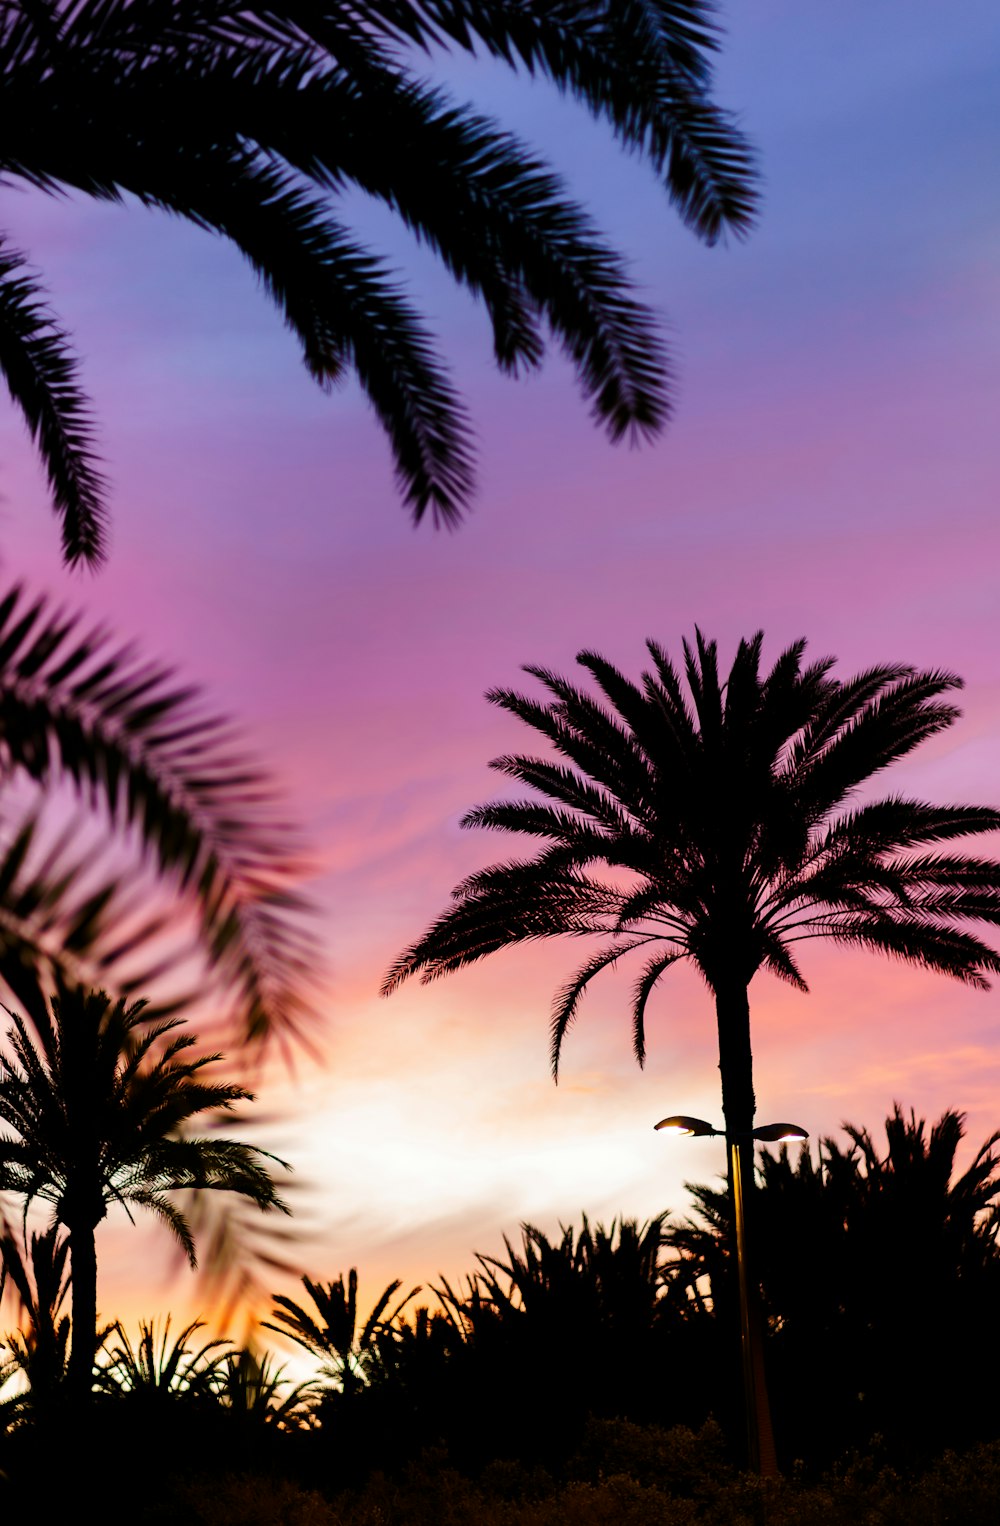 palm trees are silhouetted against a colorful sunset